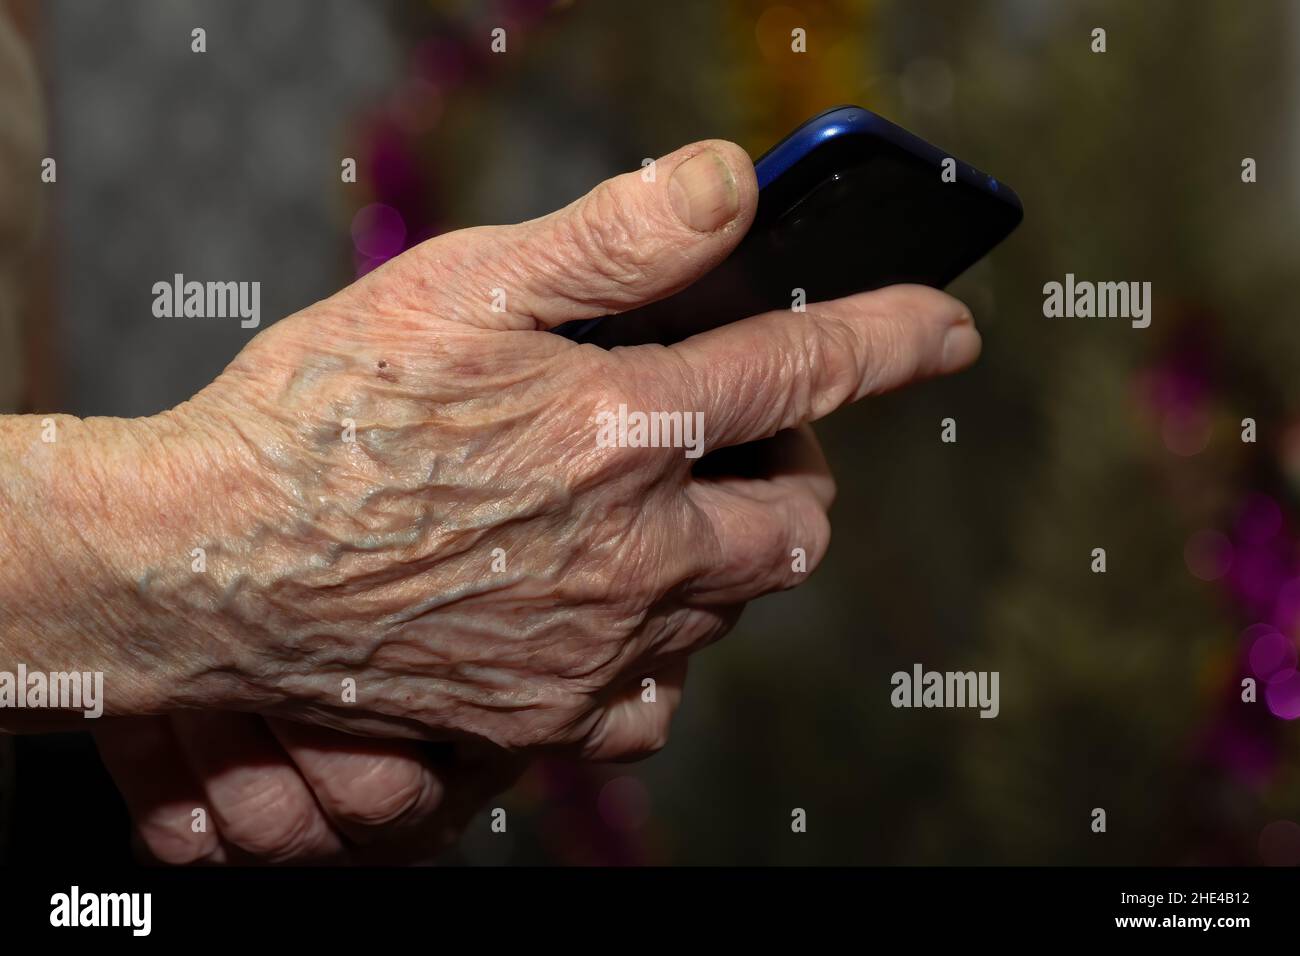 Old woman's wrinkled hand holding modern mobile phone Stock Photo